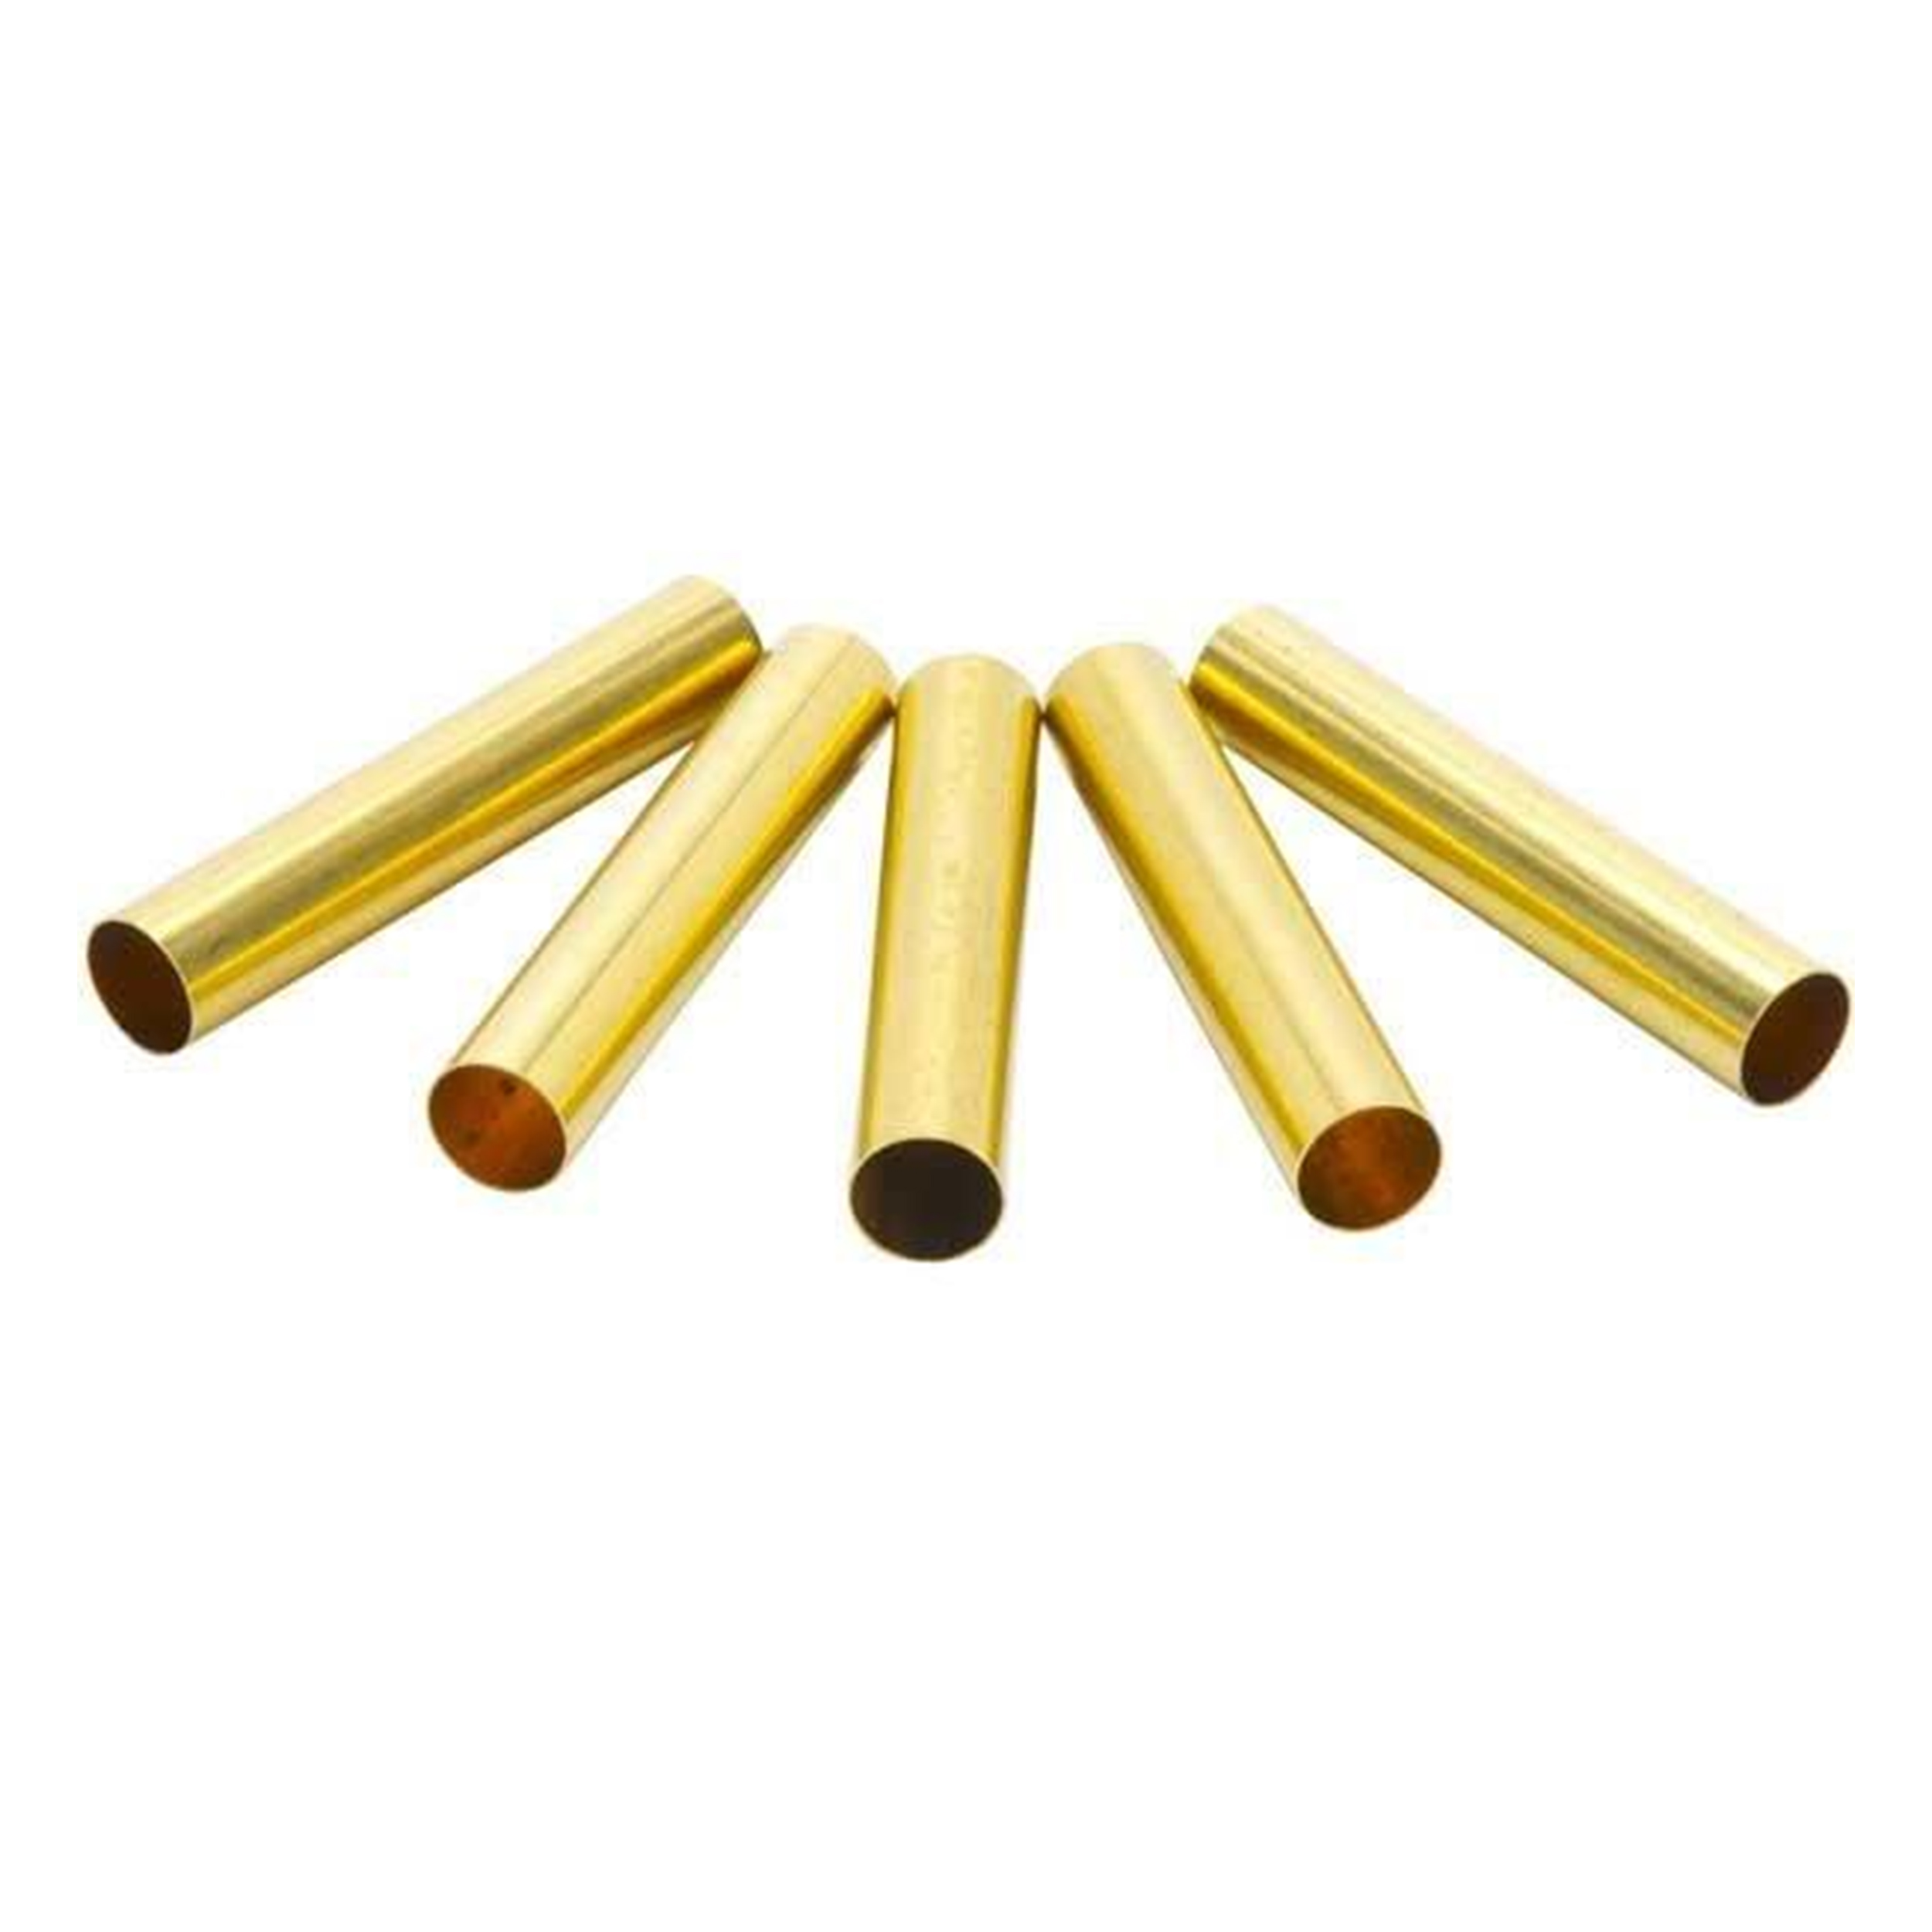 Replacement Tubes For Lever Action Ballpoint Pen Kit